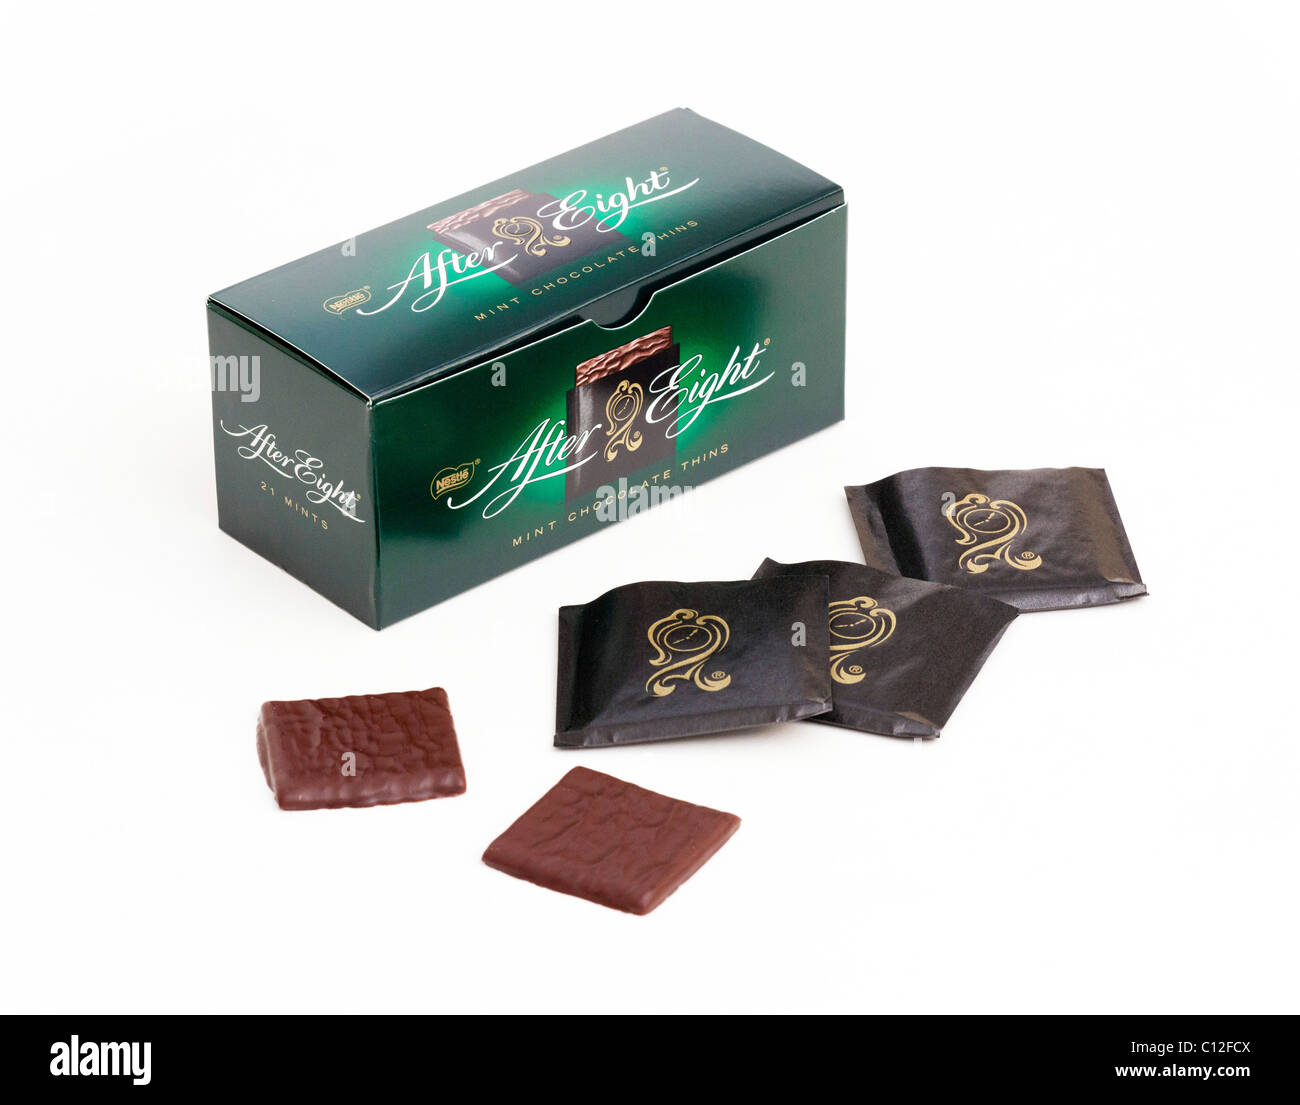 Milk Chocolate After Eights Stock Photo - Alamy